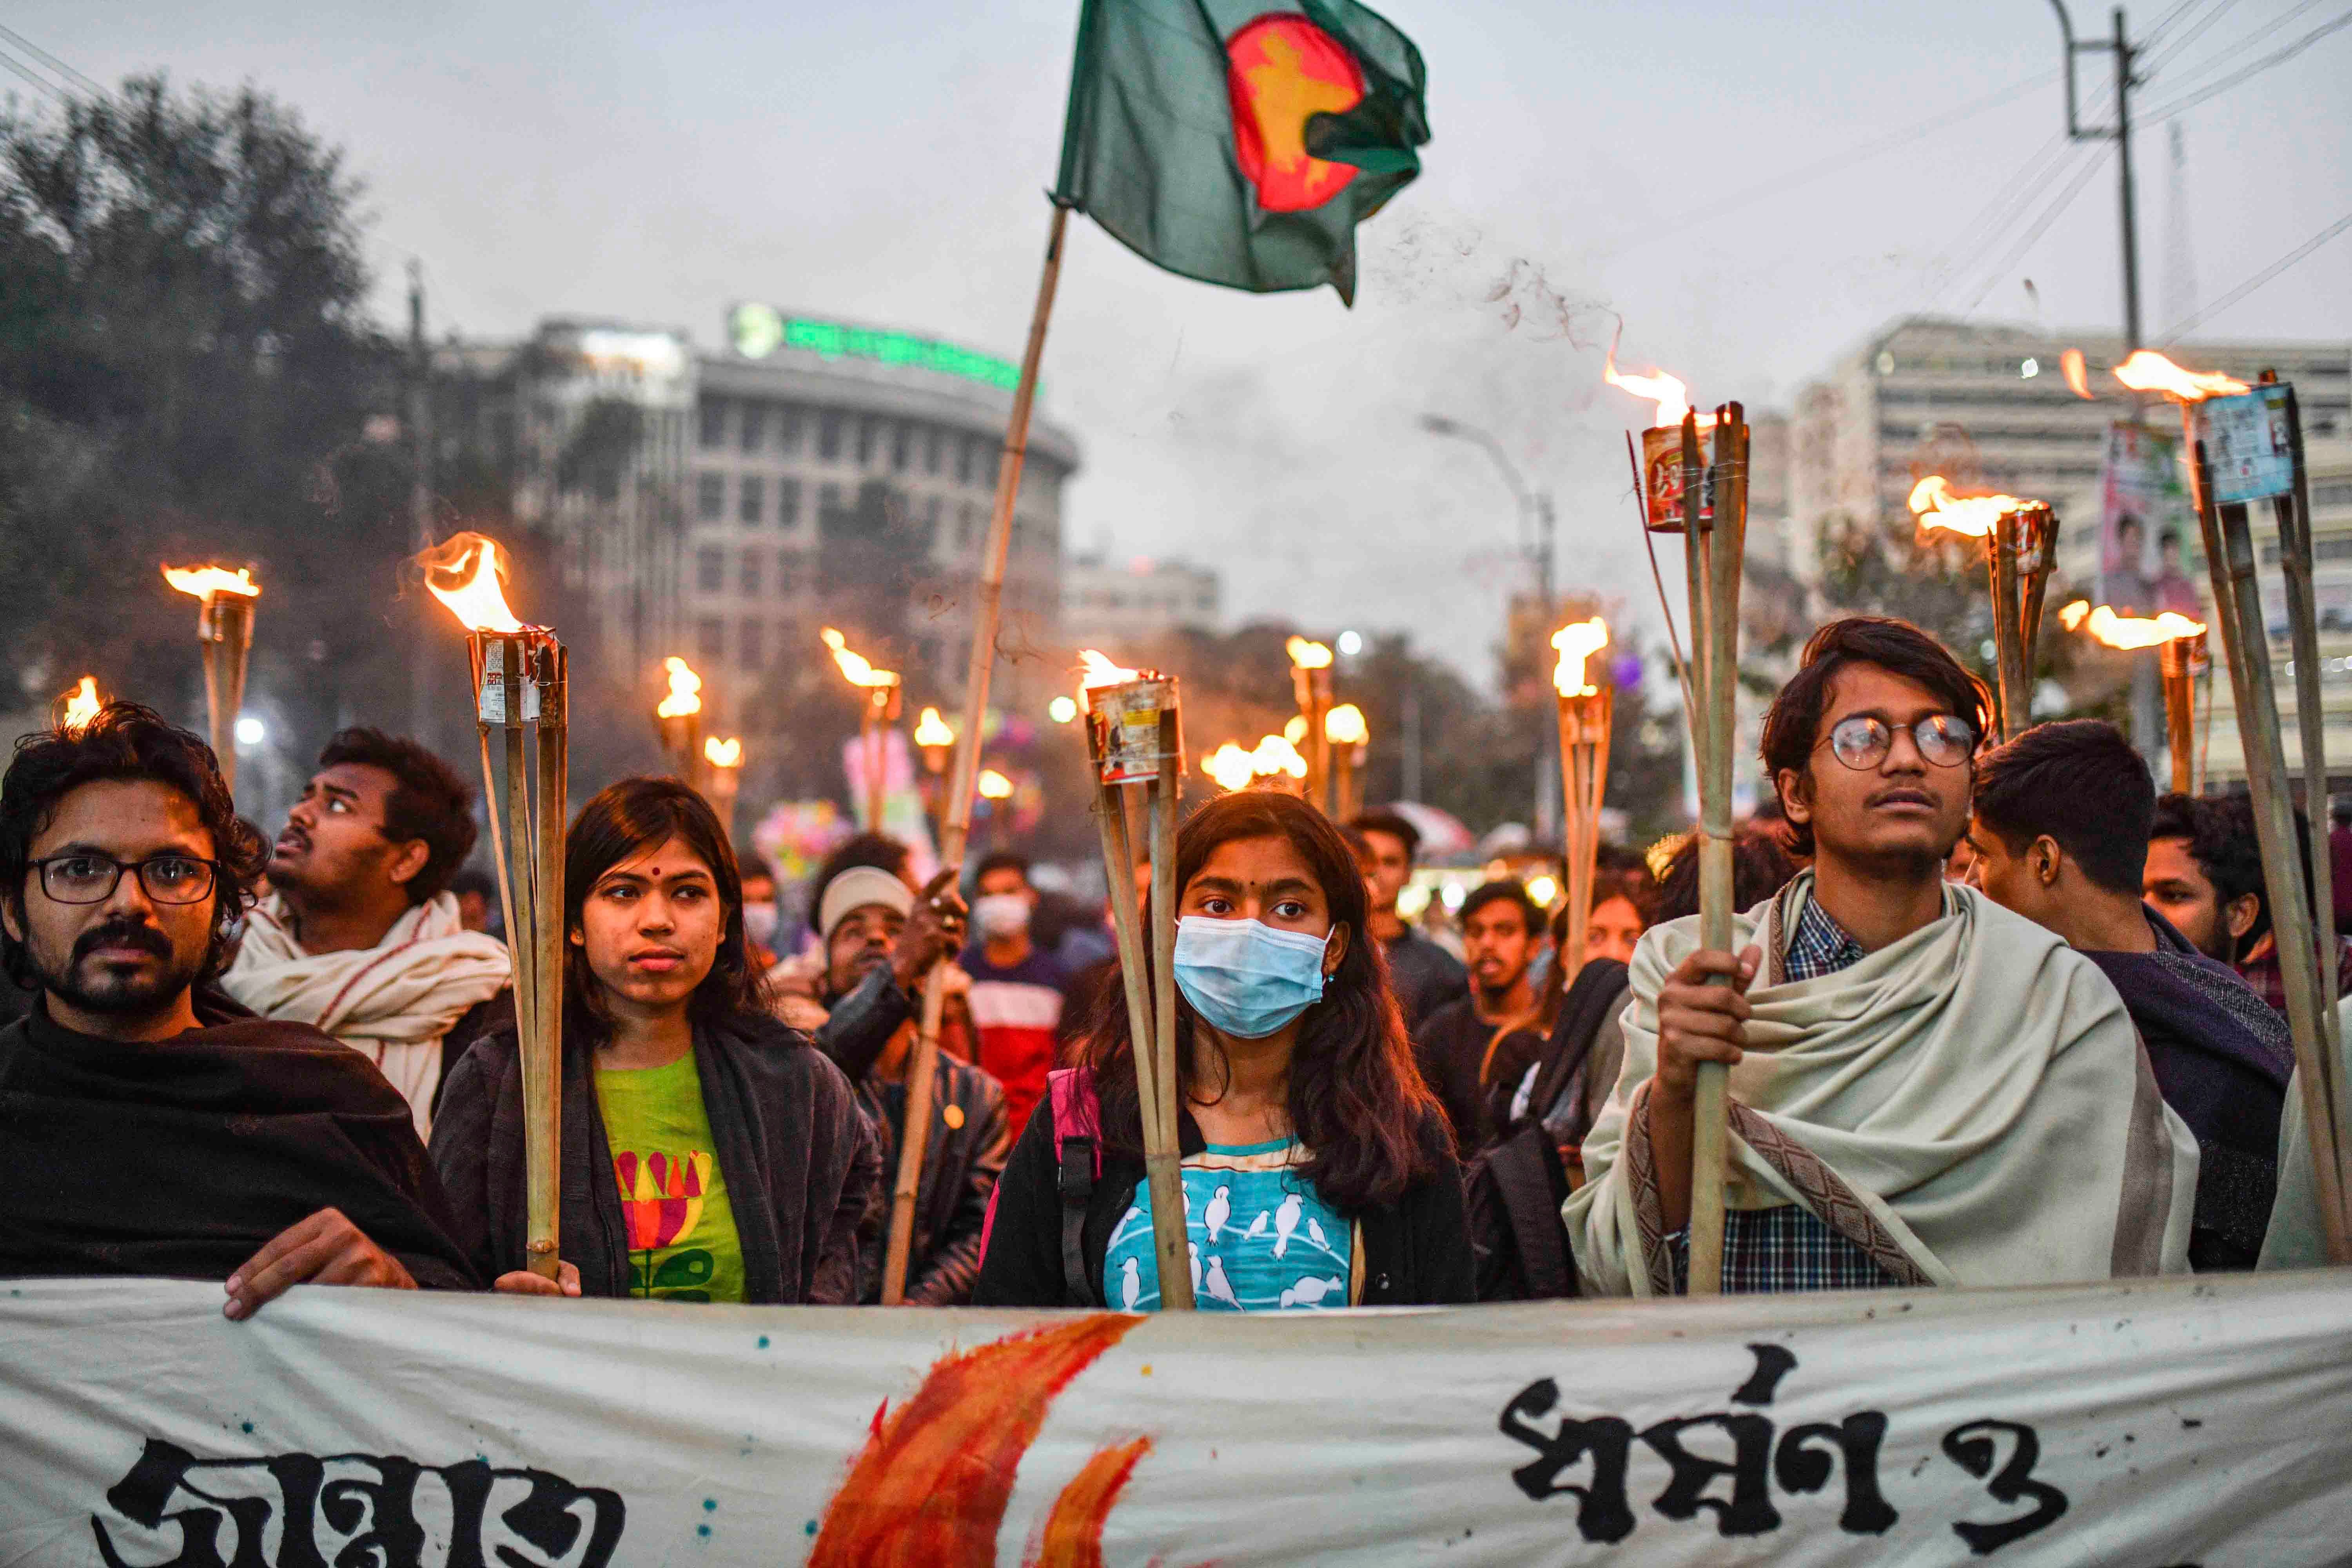 Students and activists take part in a torch procession demanding for the government to take action against murder and rape in Bangladesh.